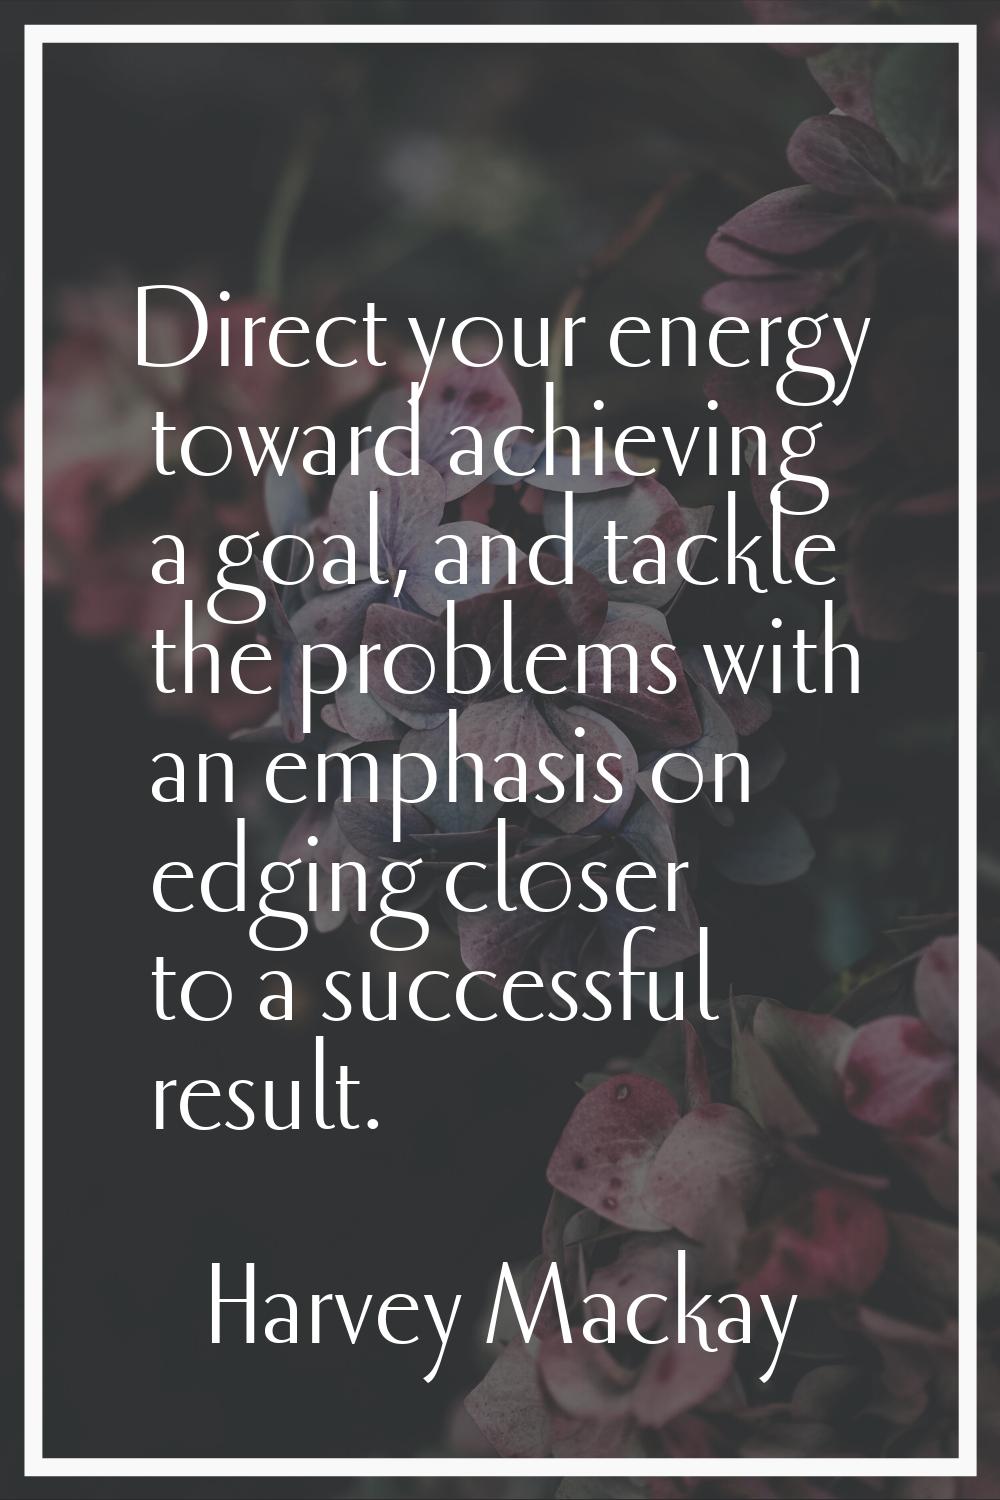 Direct your energy toward achieving a goal, and tackle the problems with an emphasis on edging clos